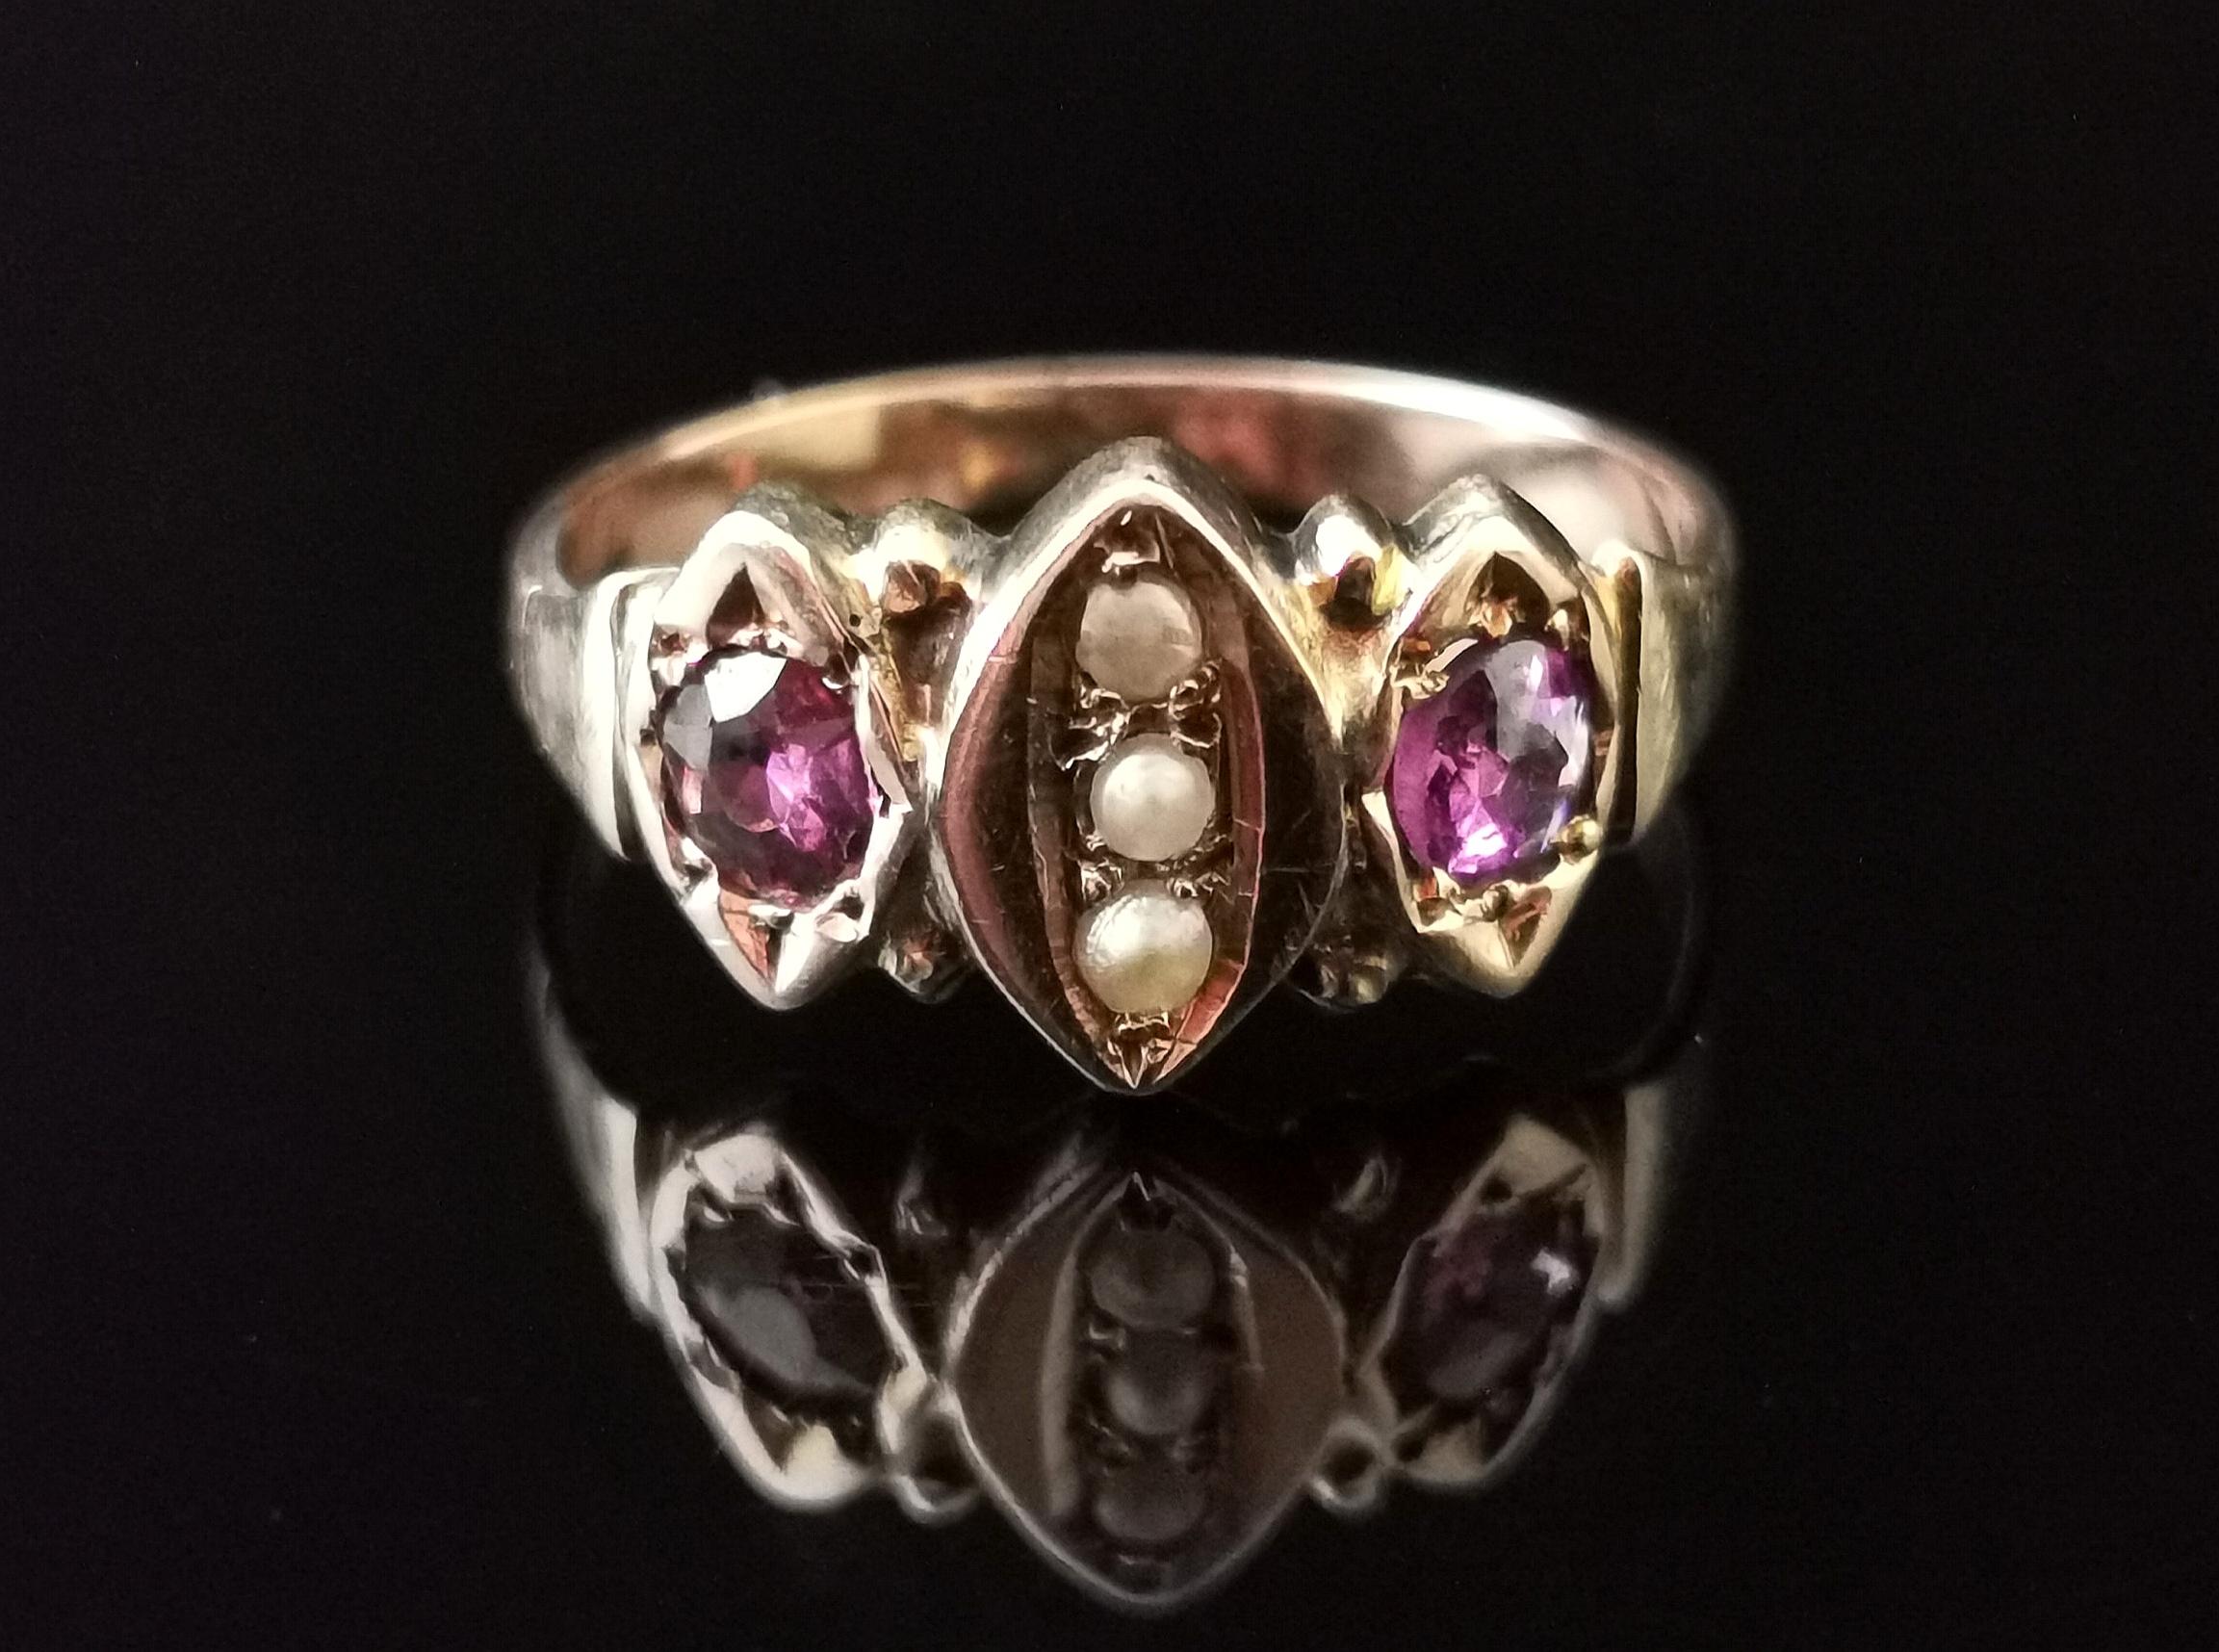 A pretty antique Victorian Amethyst and seed pearl ring in 9kt Rose gold.

This ring has a navette shaped centre set with three creamy seed pearls which is shouldered each side by a rich purple round cut Amethyst.

It has a 9kt gold band and the